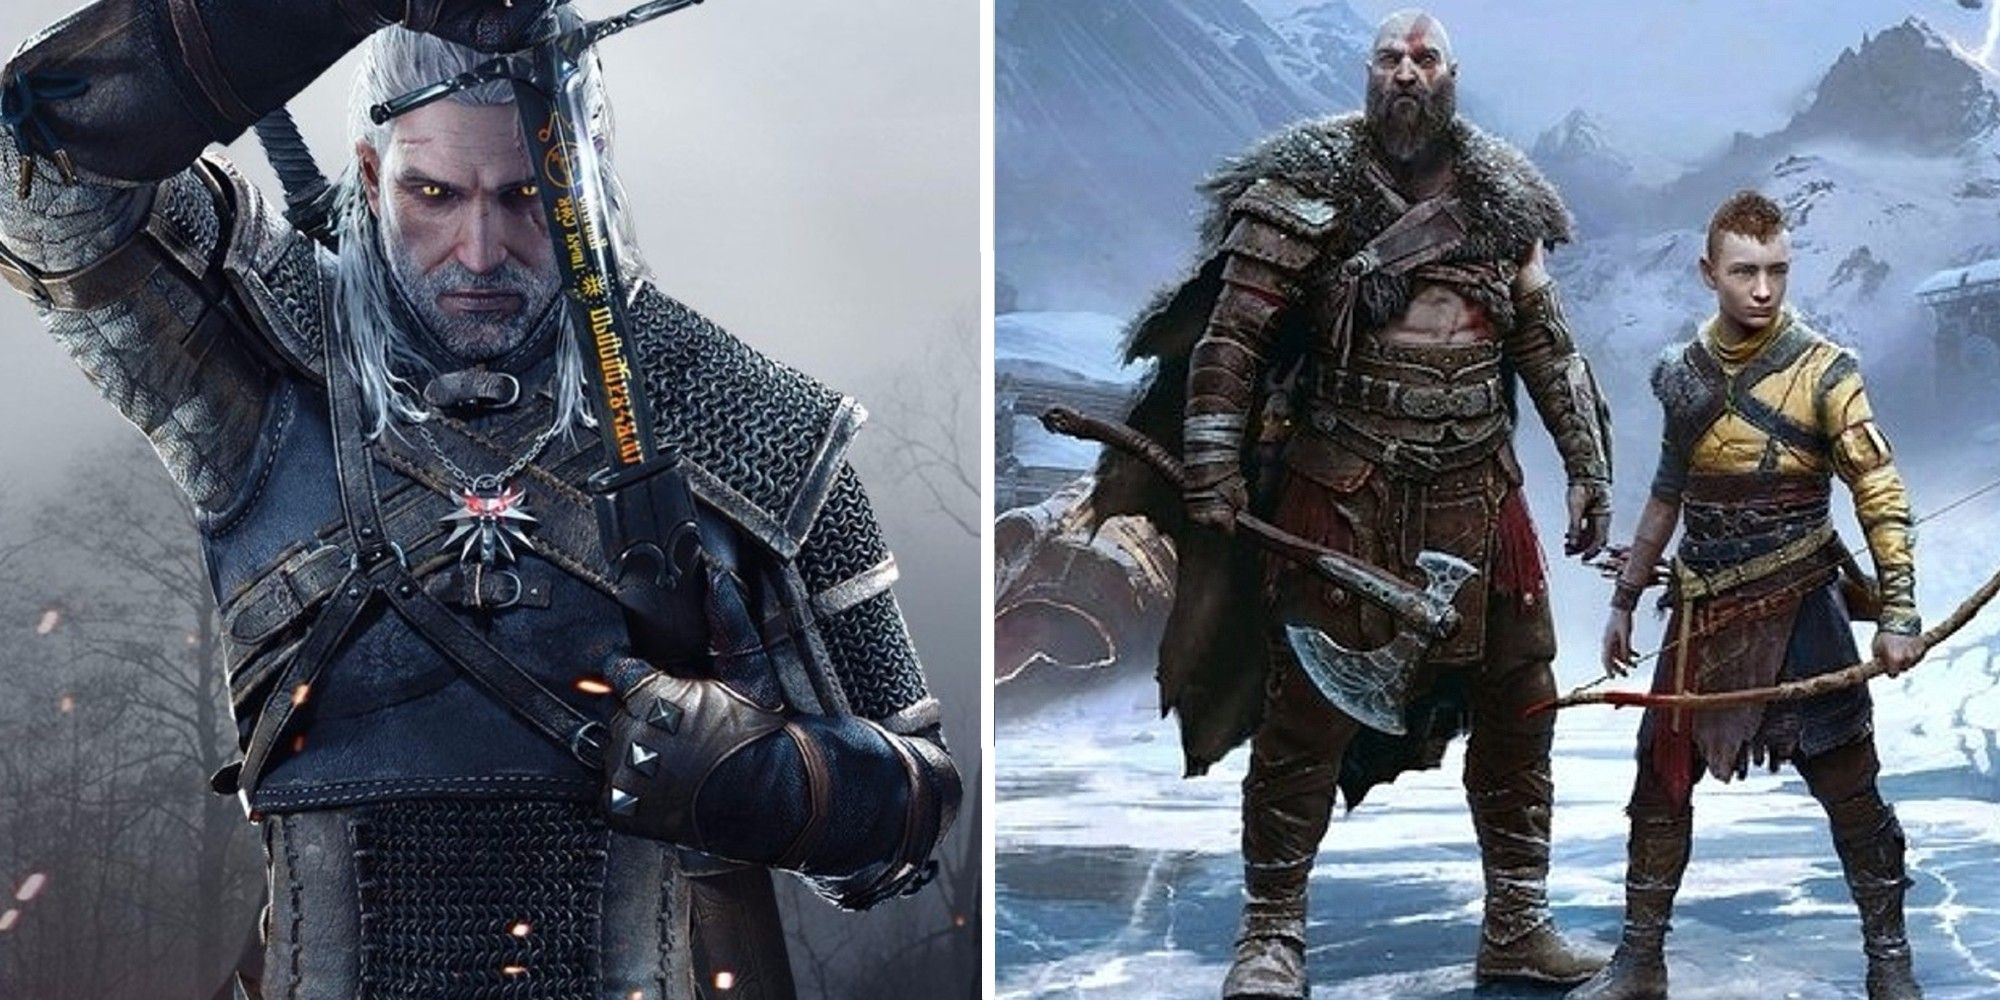 Geralt from the Witcher 3 with Kratos and Atreus from God Of War